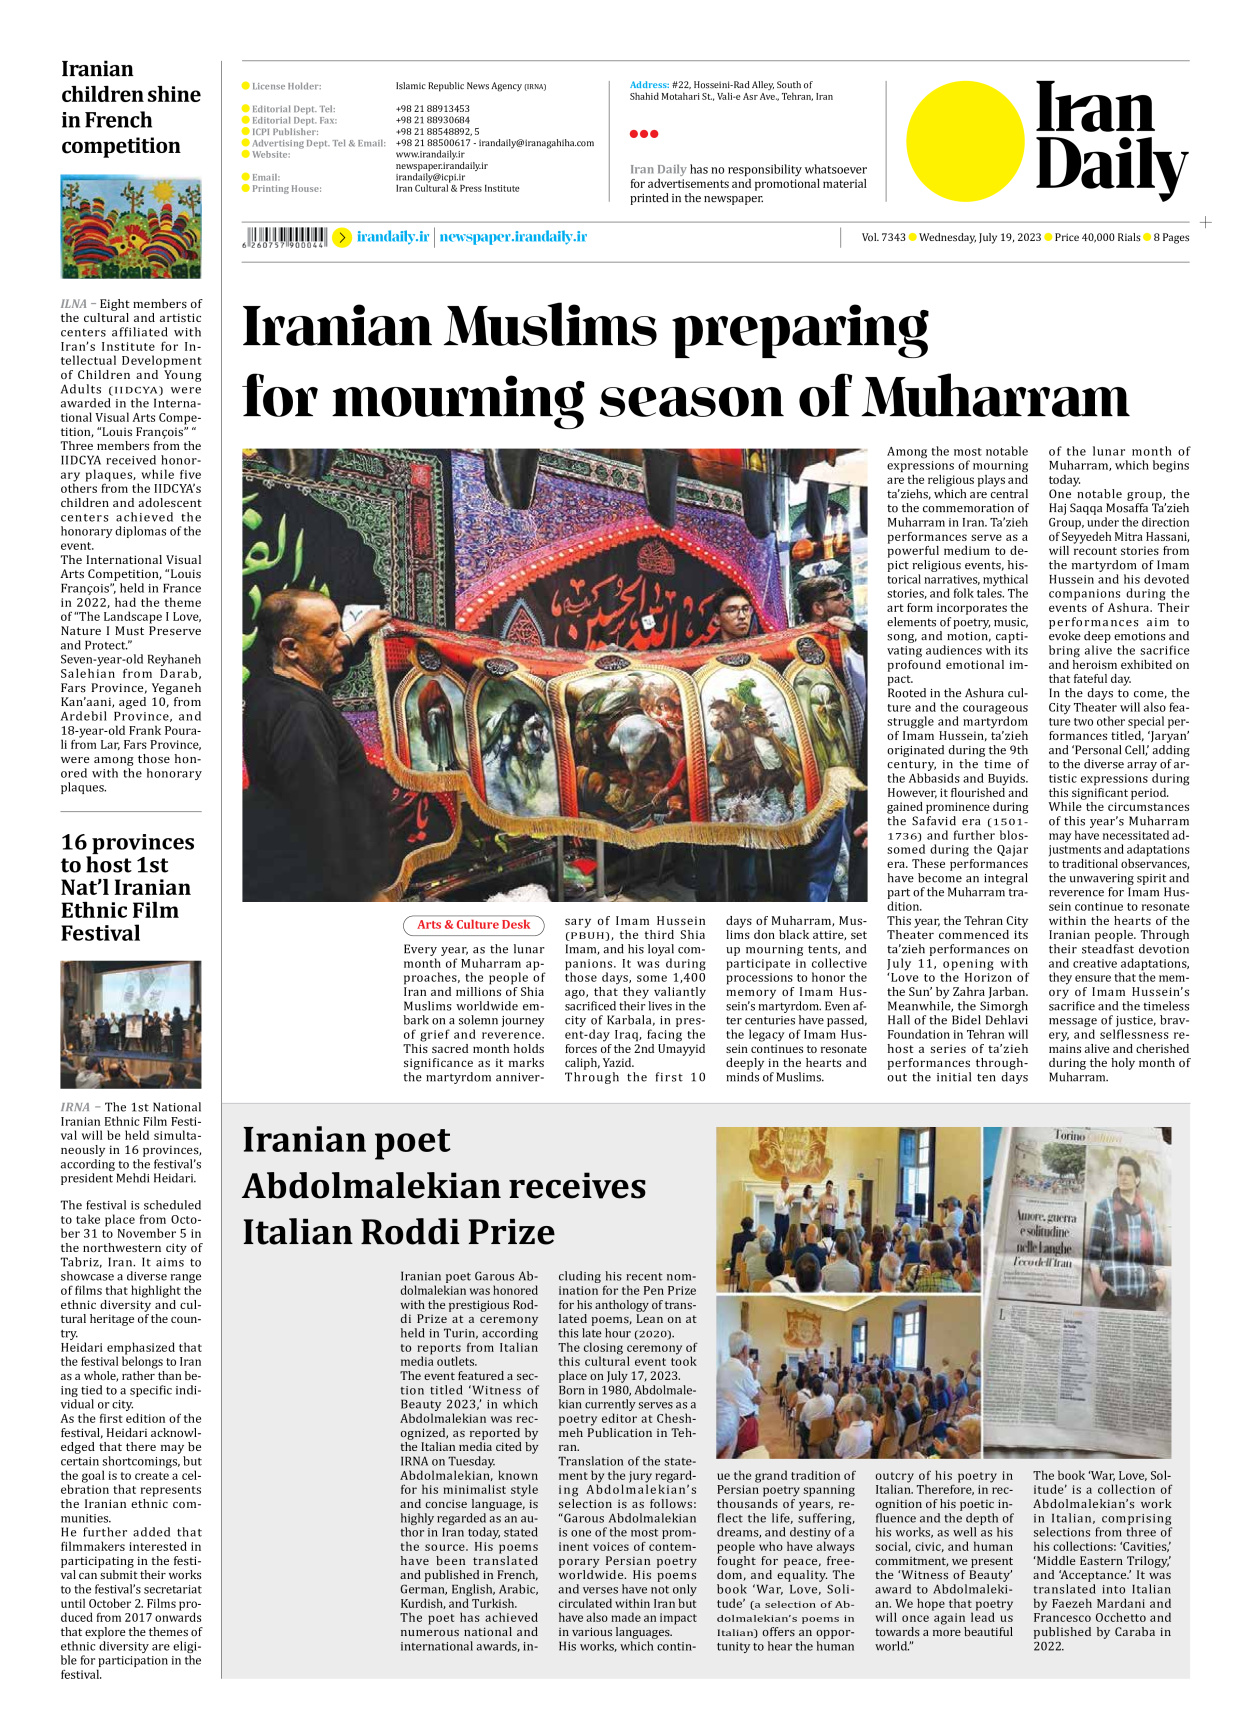 Iran Daily - Number Seven Thousand Three Hundred and Forty Three - 19 July 2023 - Page 8